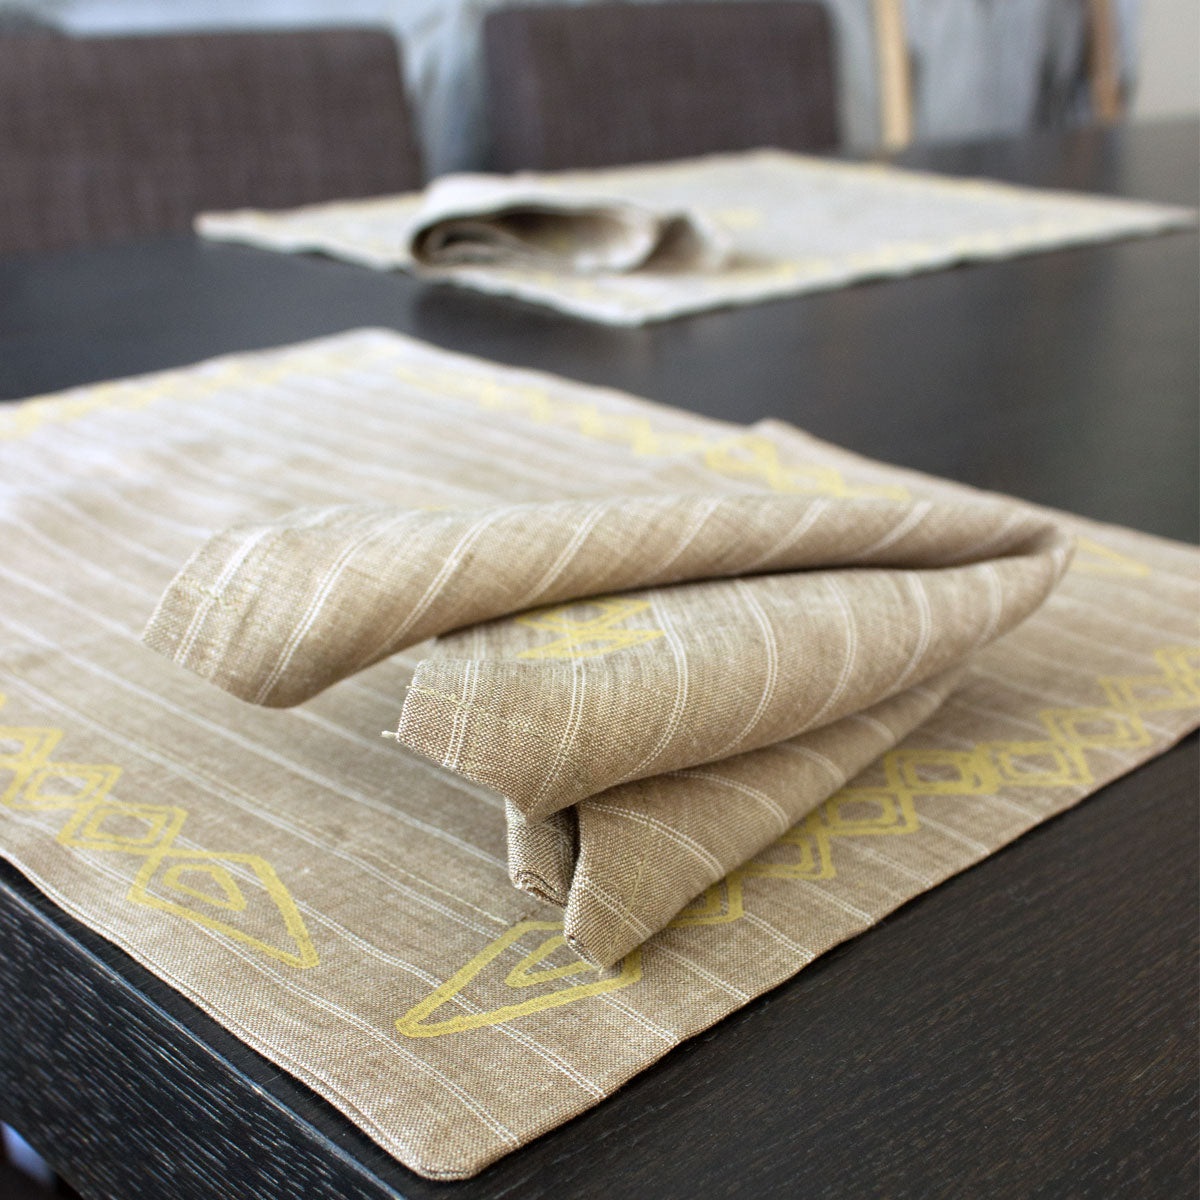 Printed Italian linen placemats Arrows